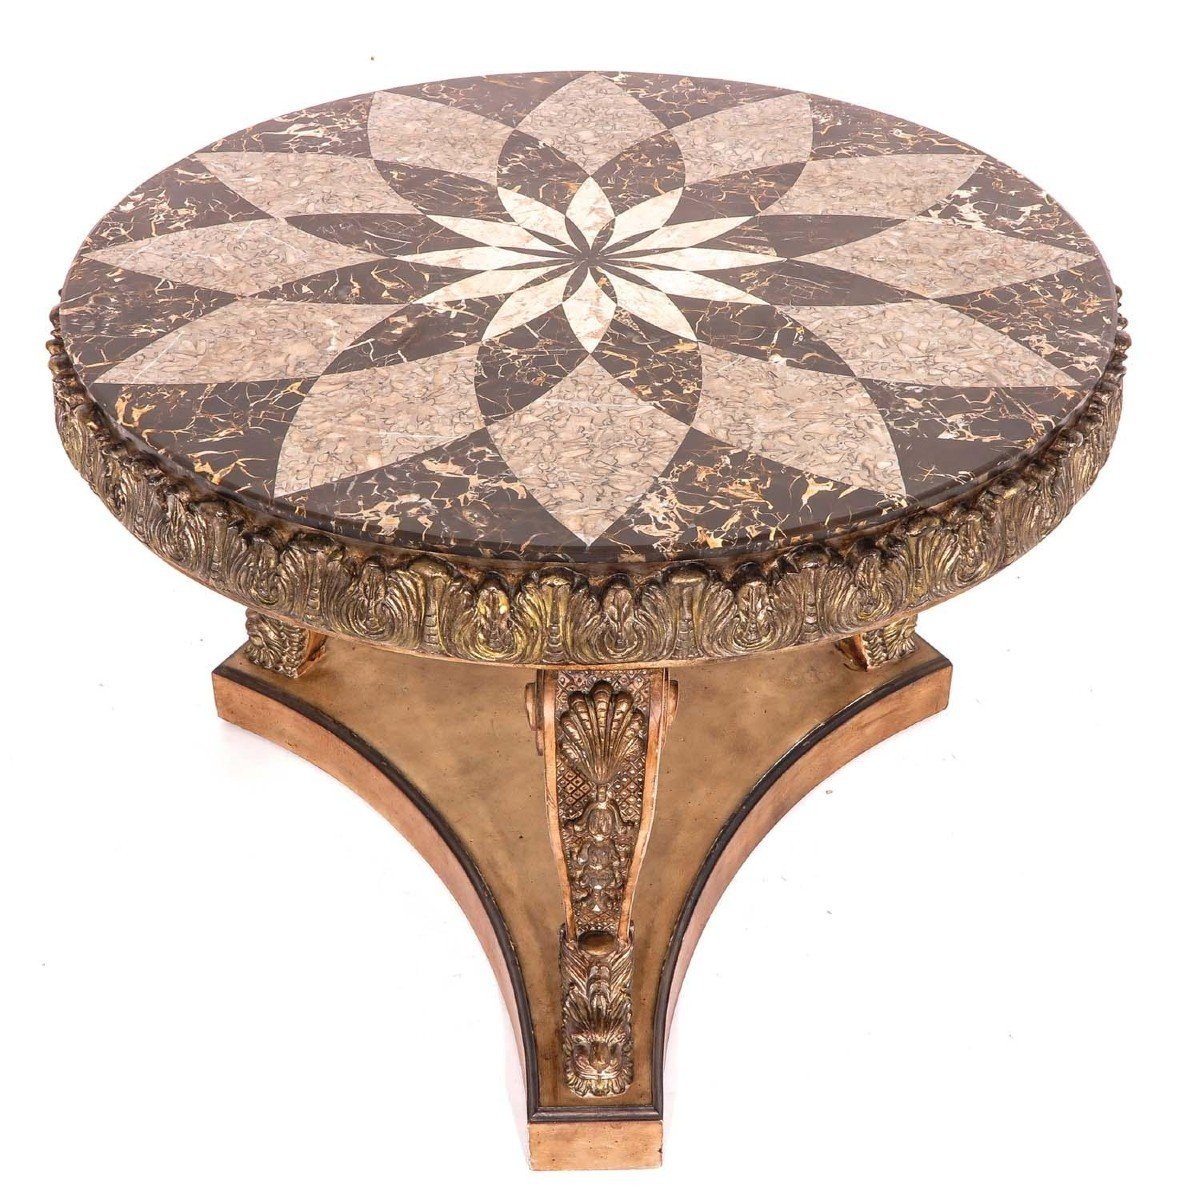 Decorative Center Table With Inlaid Marble Top 20thc.-photo-8